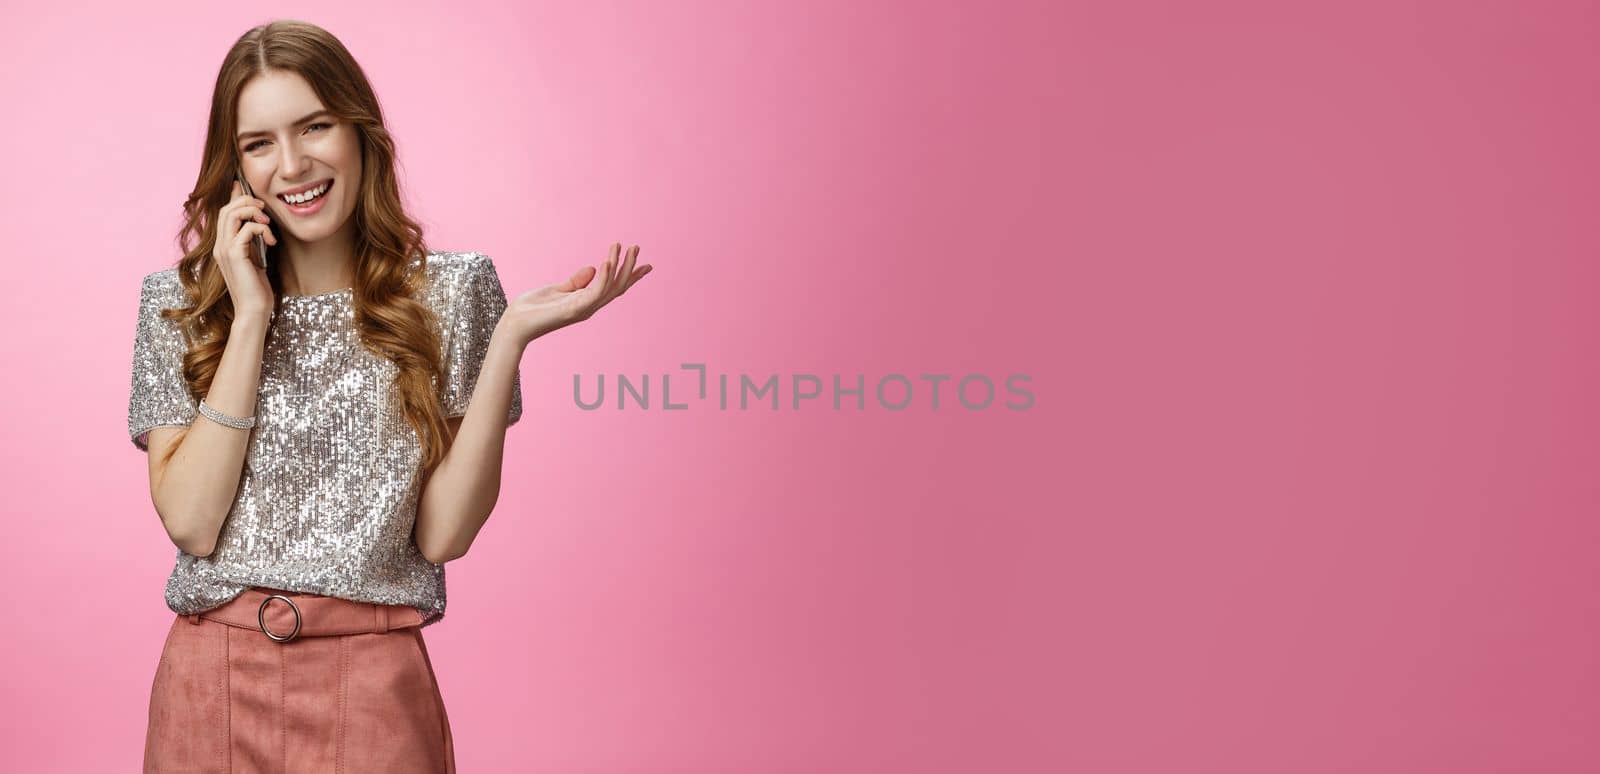 Sociable friendly-looking smiling happy glamour rich girl talking smartphone calling friend pleasant funny conversation laughing out loud joking gesturing talk mobile phone, pink background.